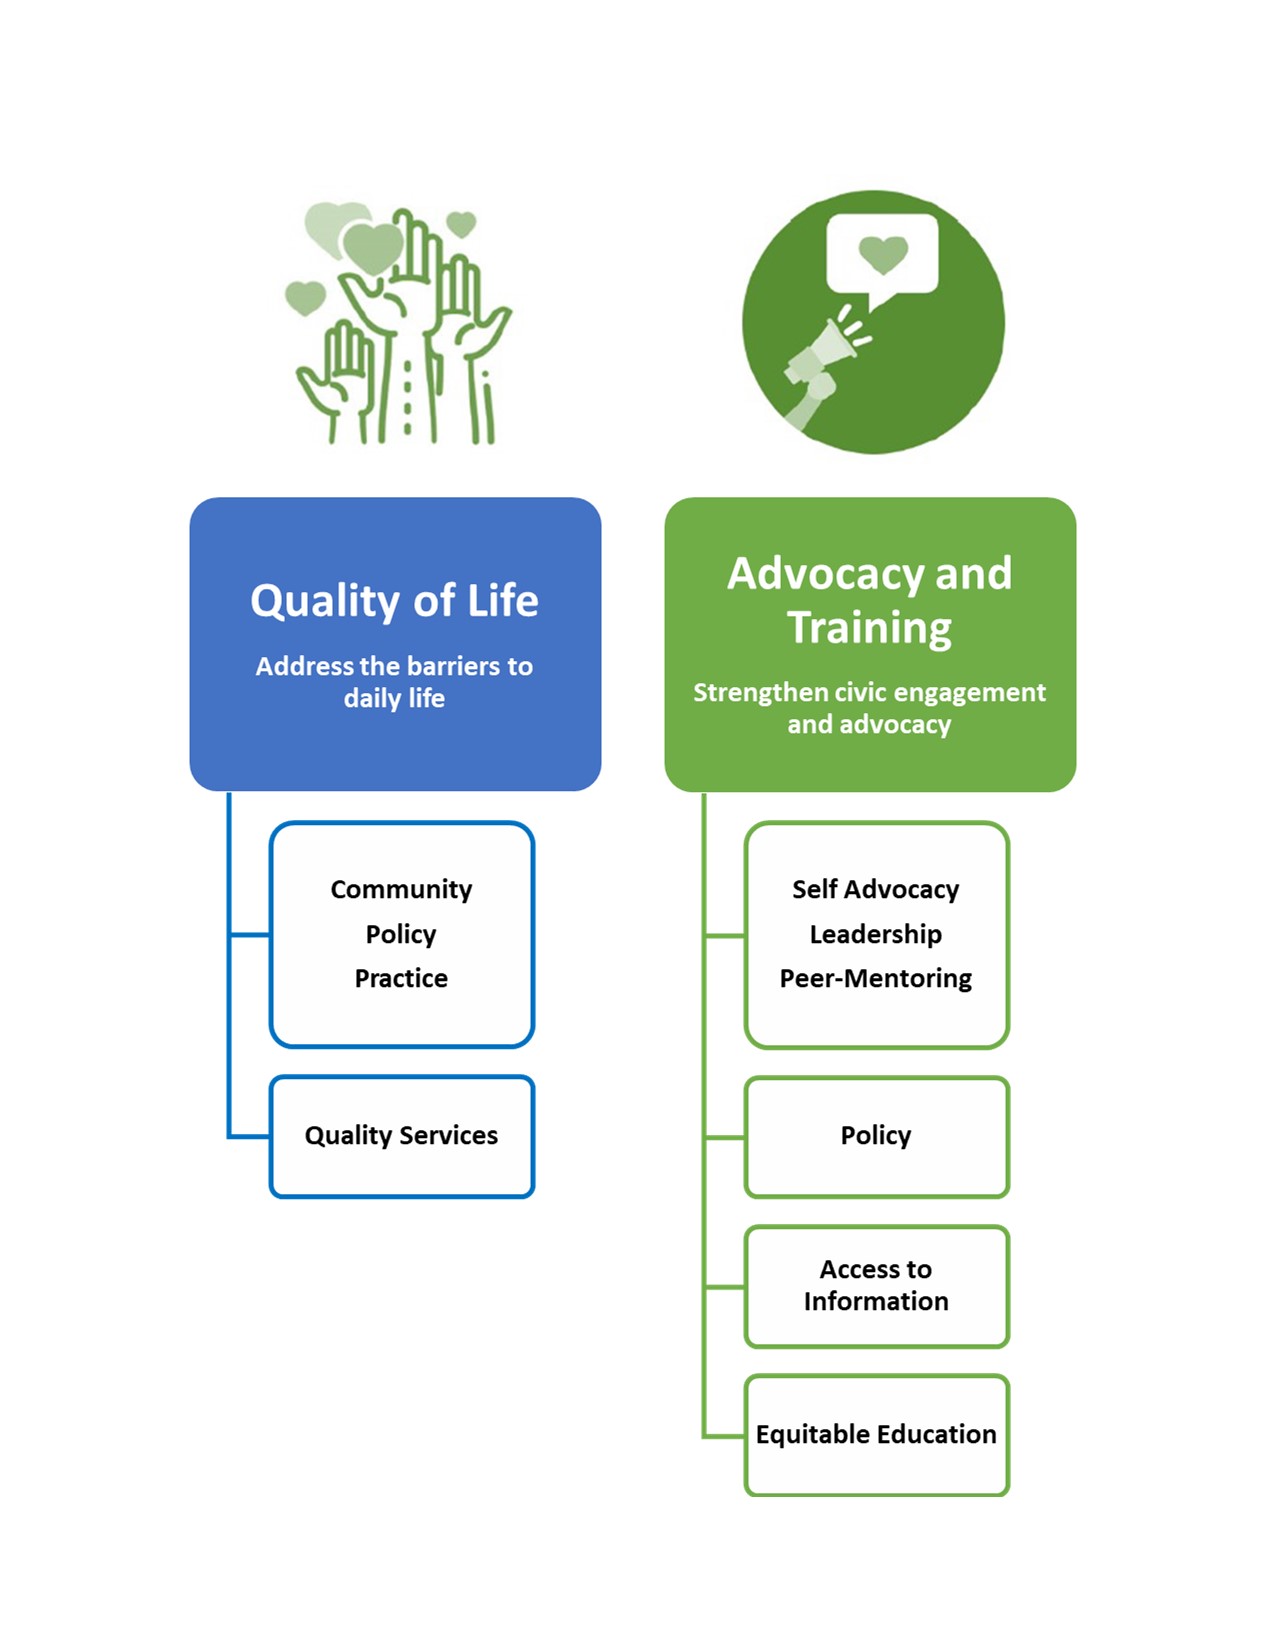 Quality of life barriers to daily life include community policy practice and quality services. Advocacy and traing strengthen civic engagement and advocacy include self advocacy leadership peer-mentoring, policy, access to infomation, and equitable education.